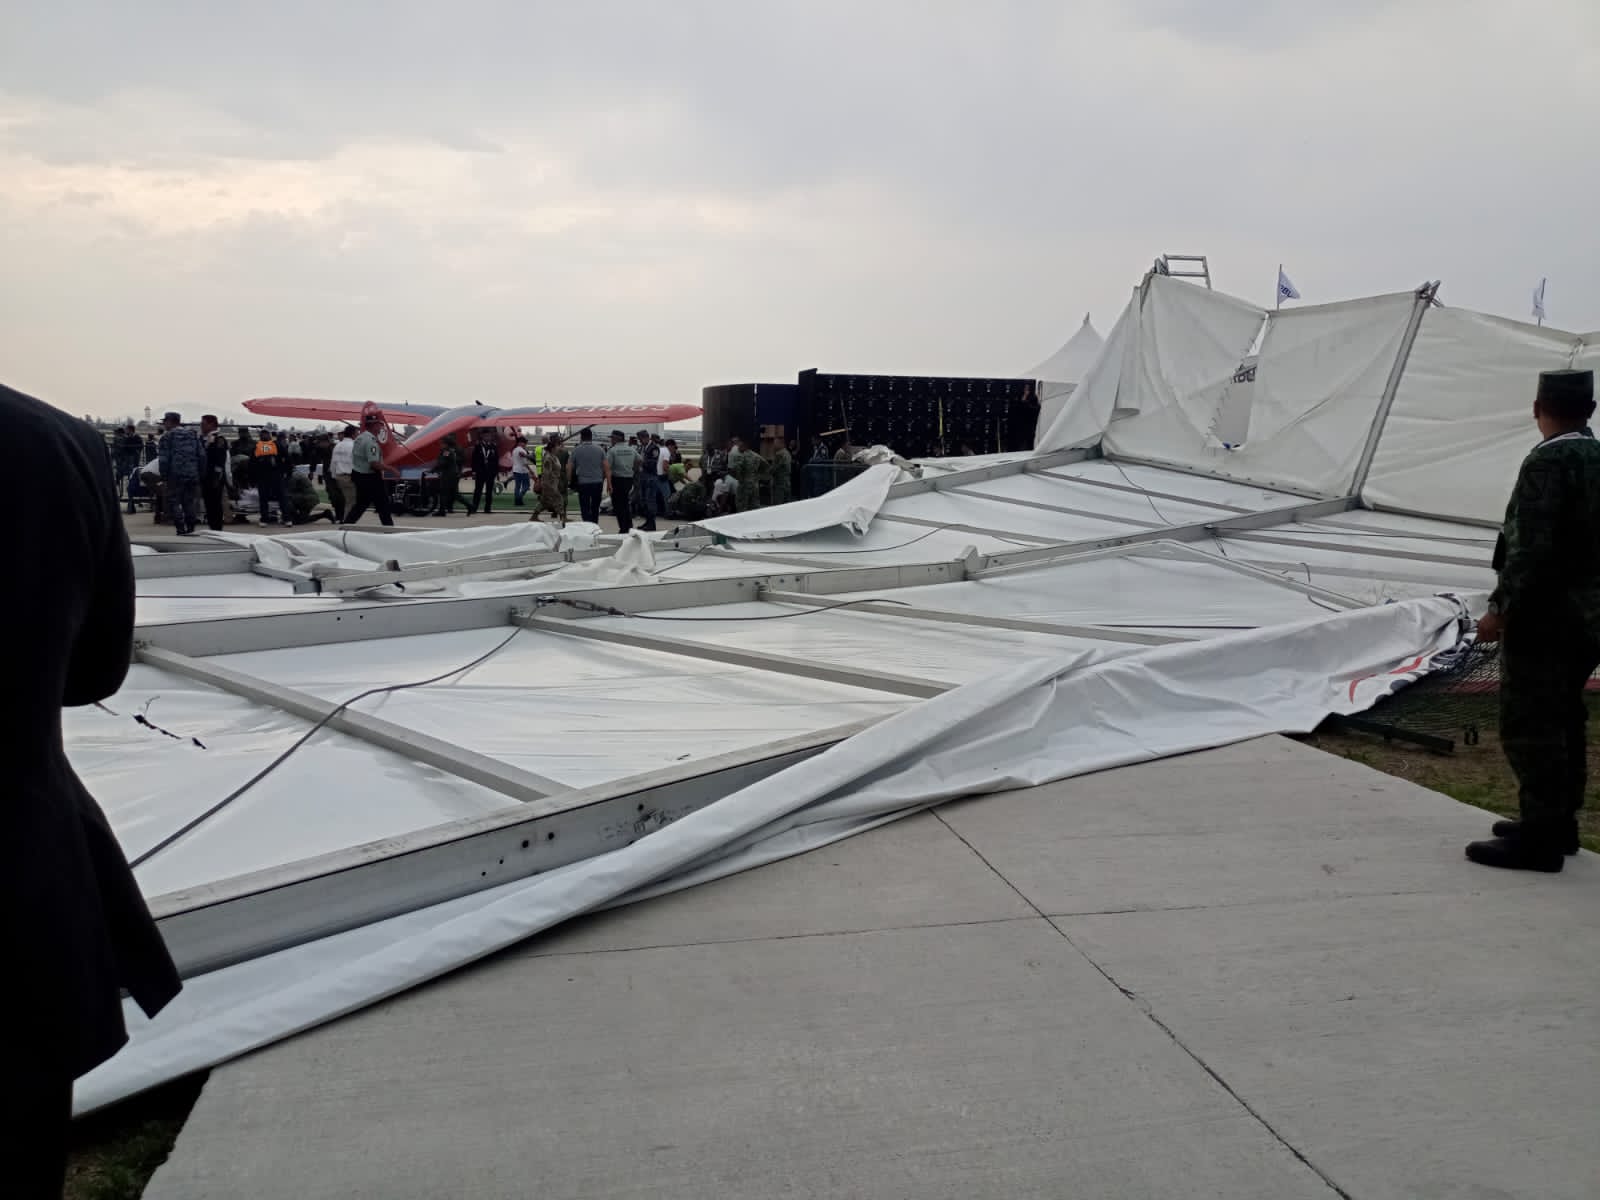 High winds cause accident at FAMEX inauguration